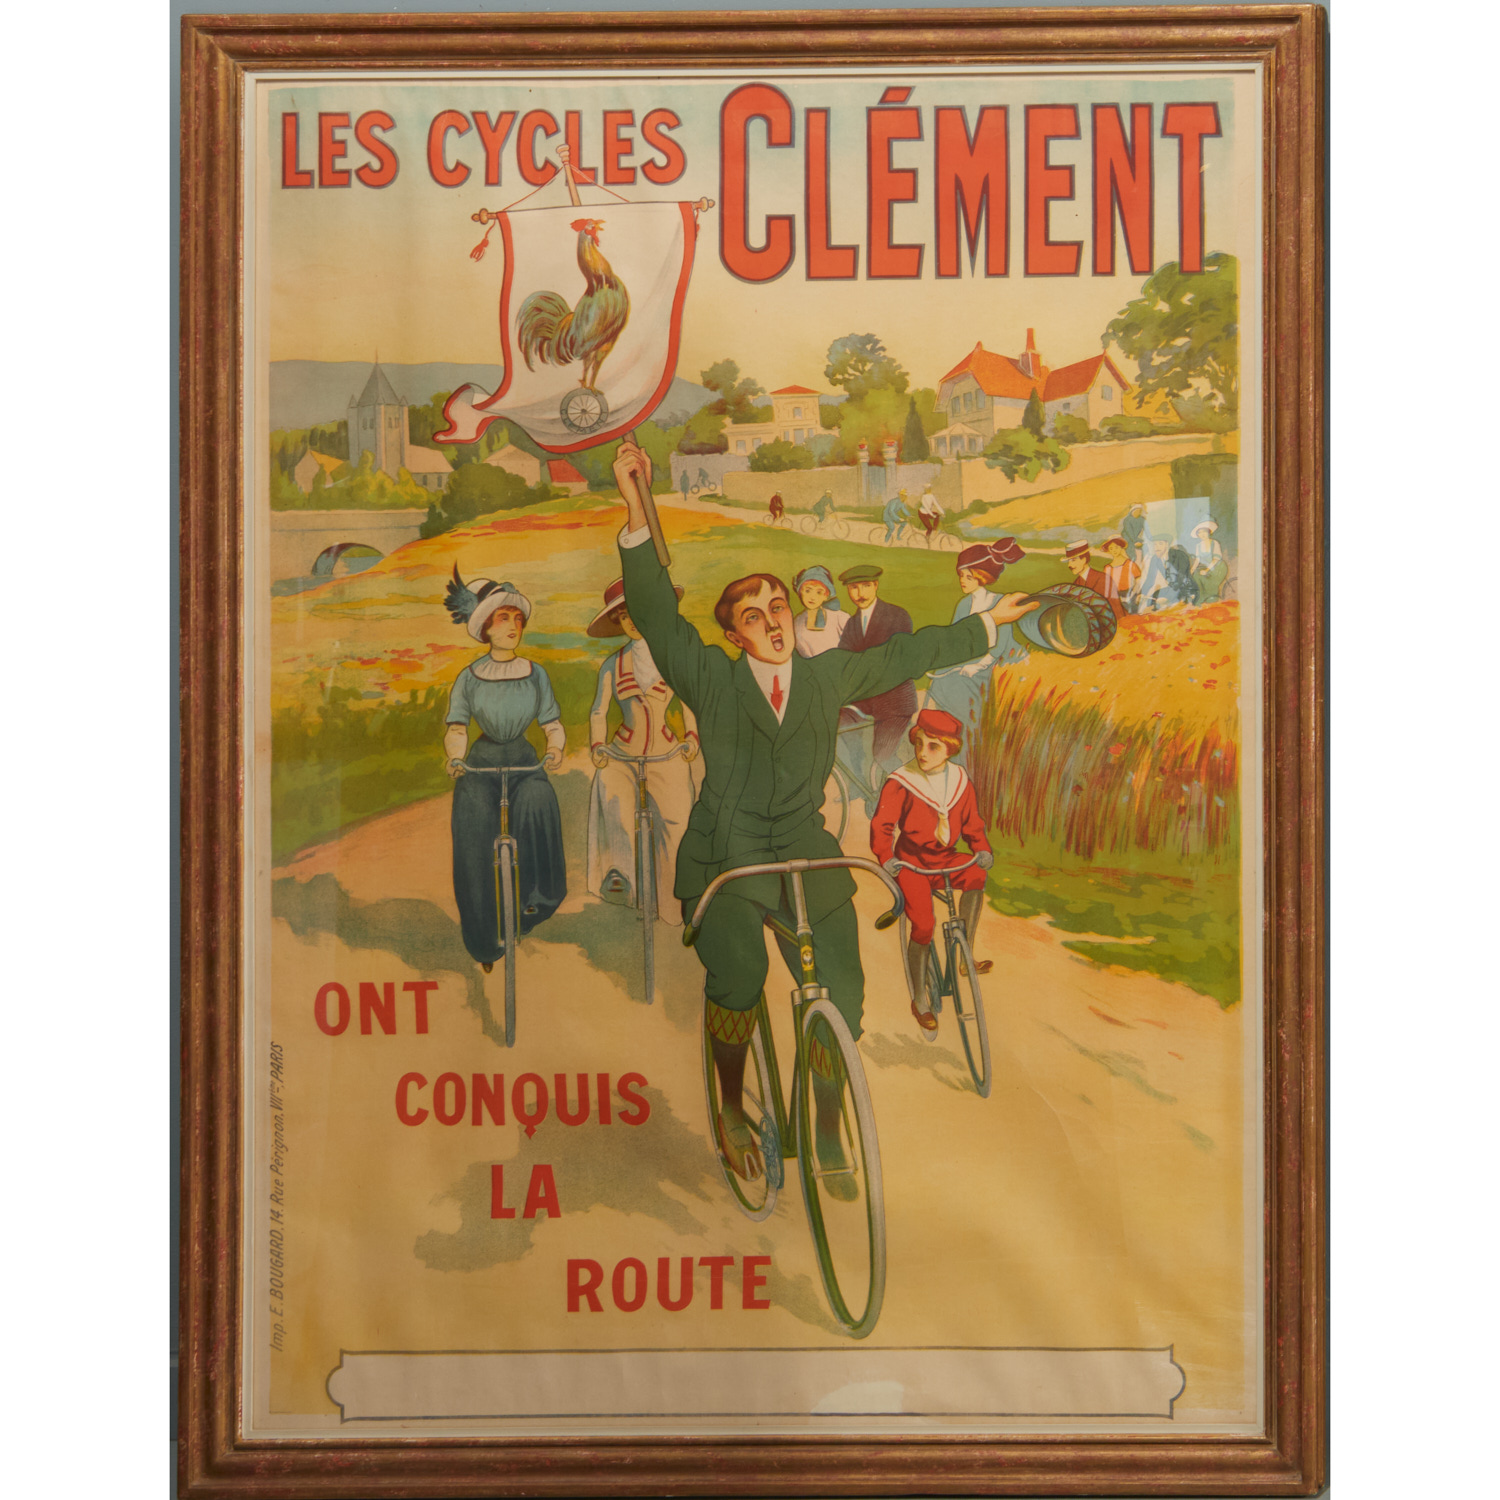 "LES CYCLES CLEMENT" LITHOGRAPHIC